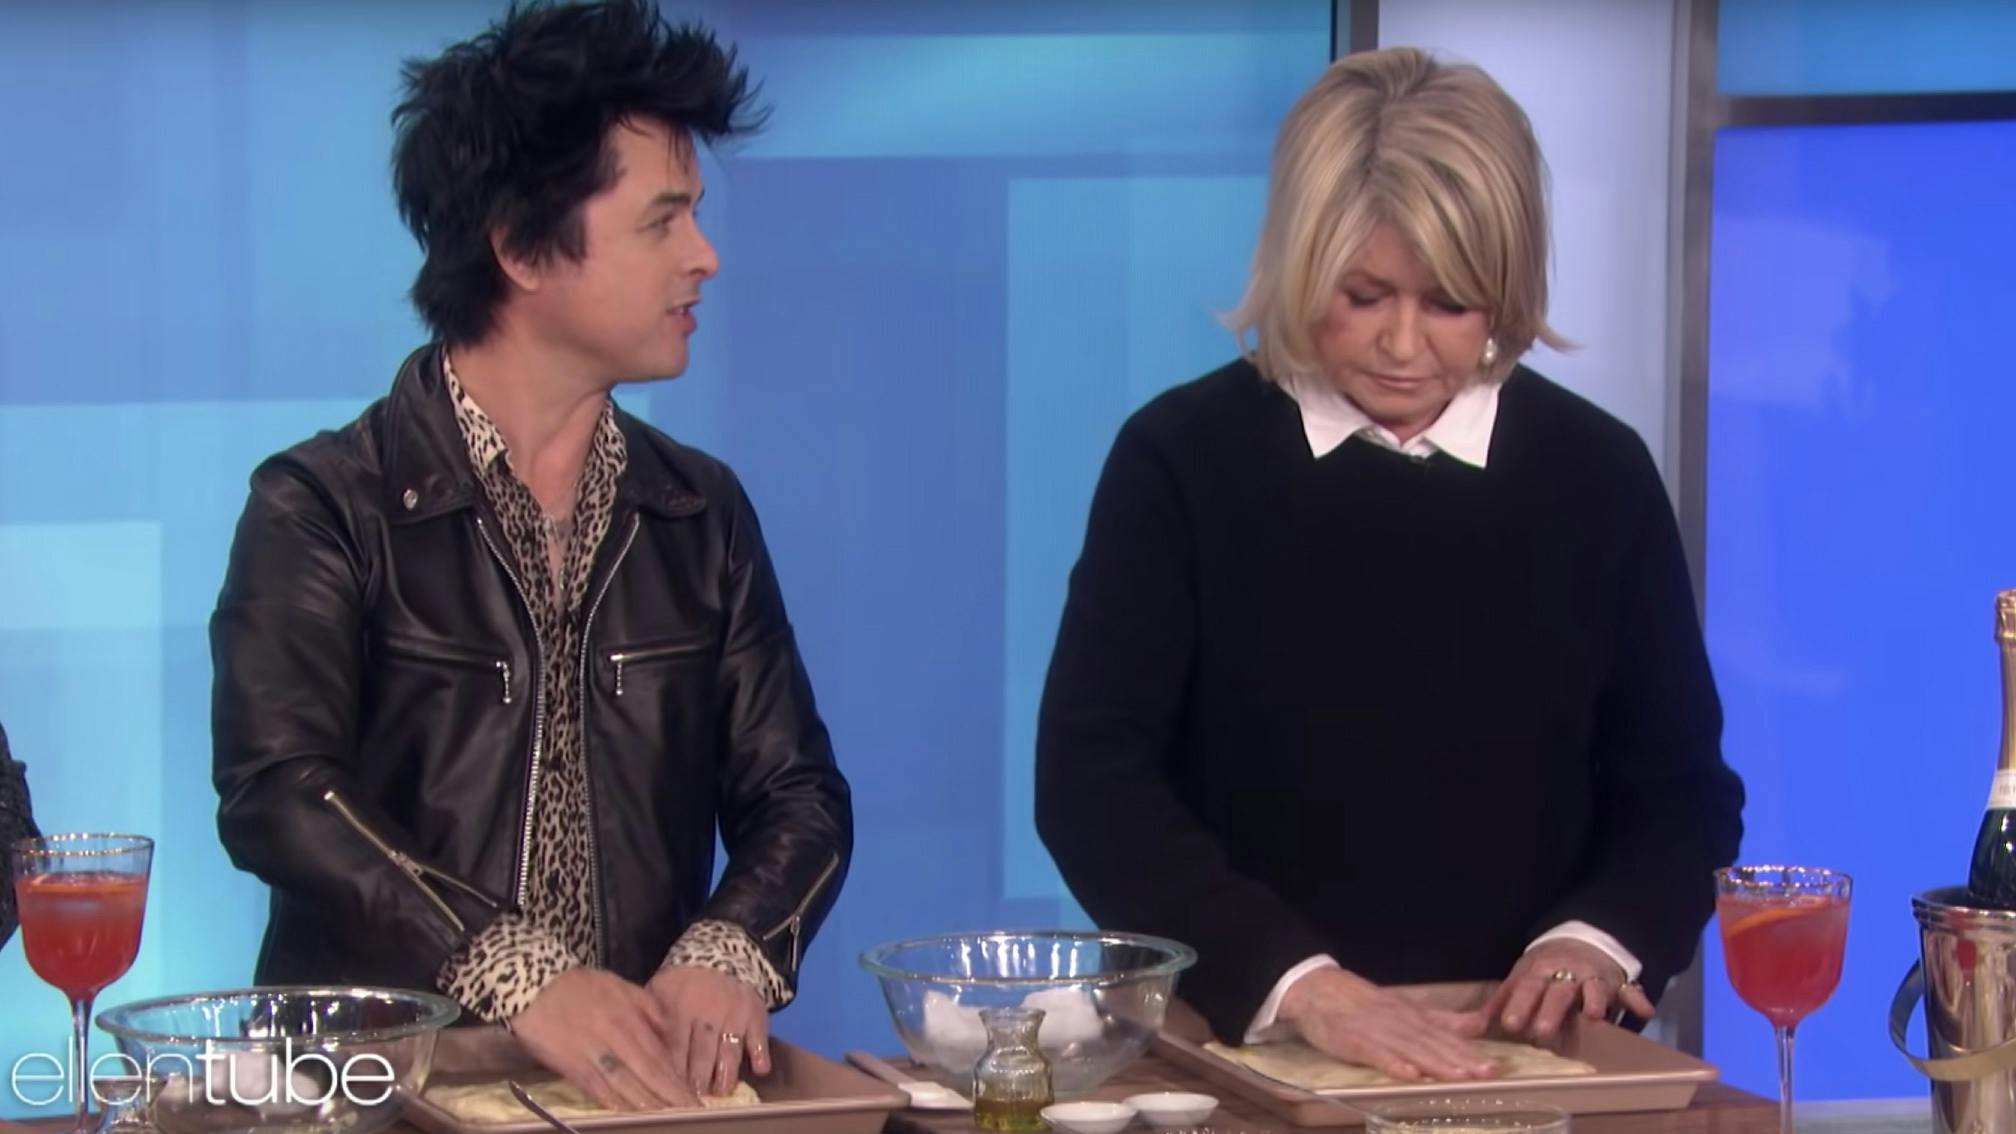 Watch Green Day Make Pizza With Snoop Dogg And Martha Stewart